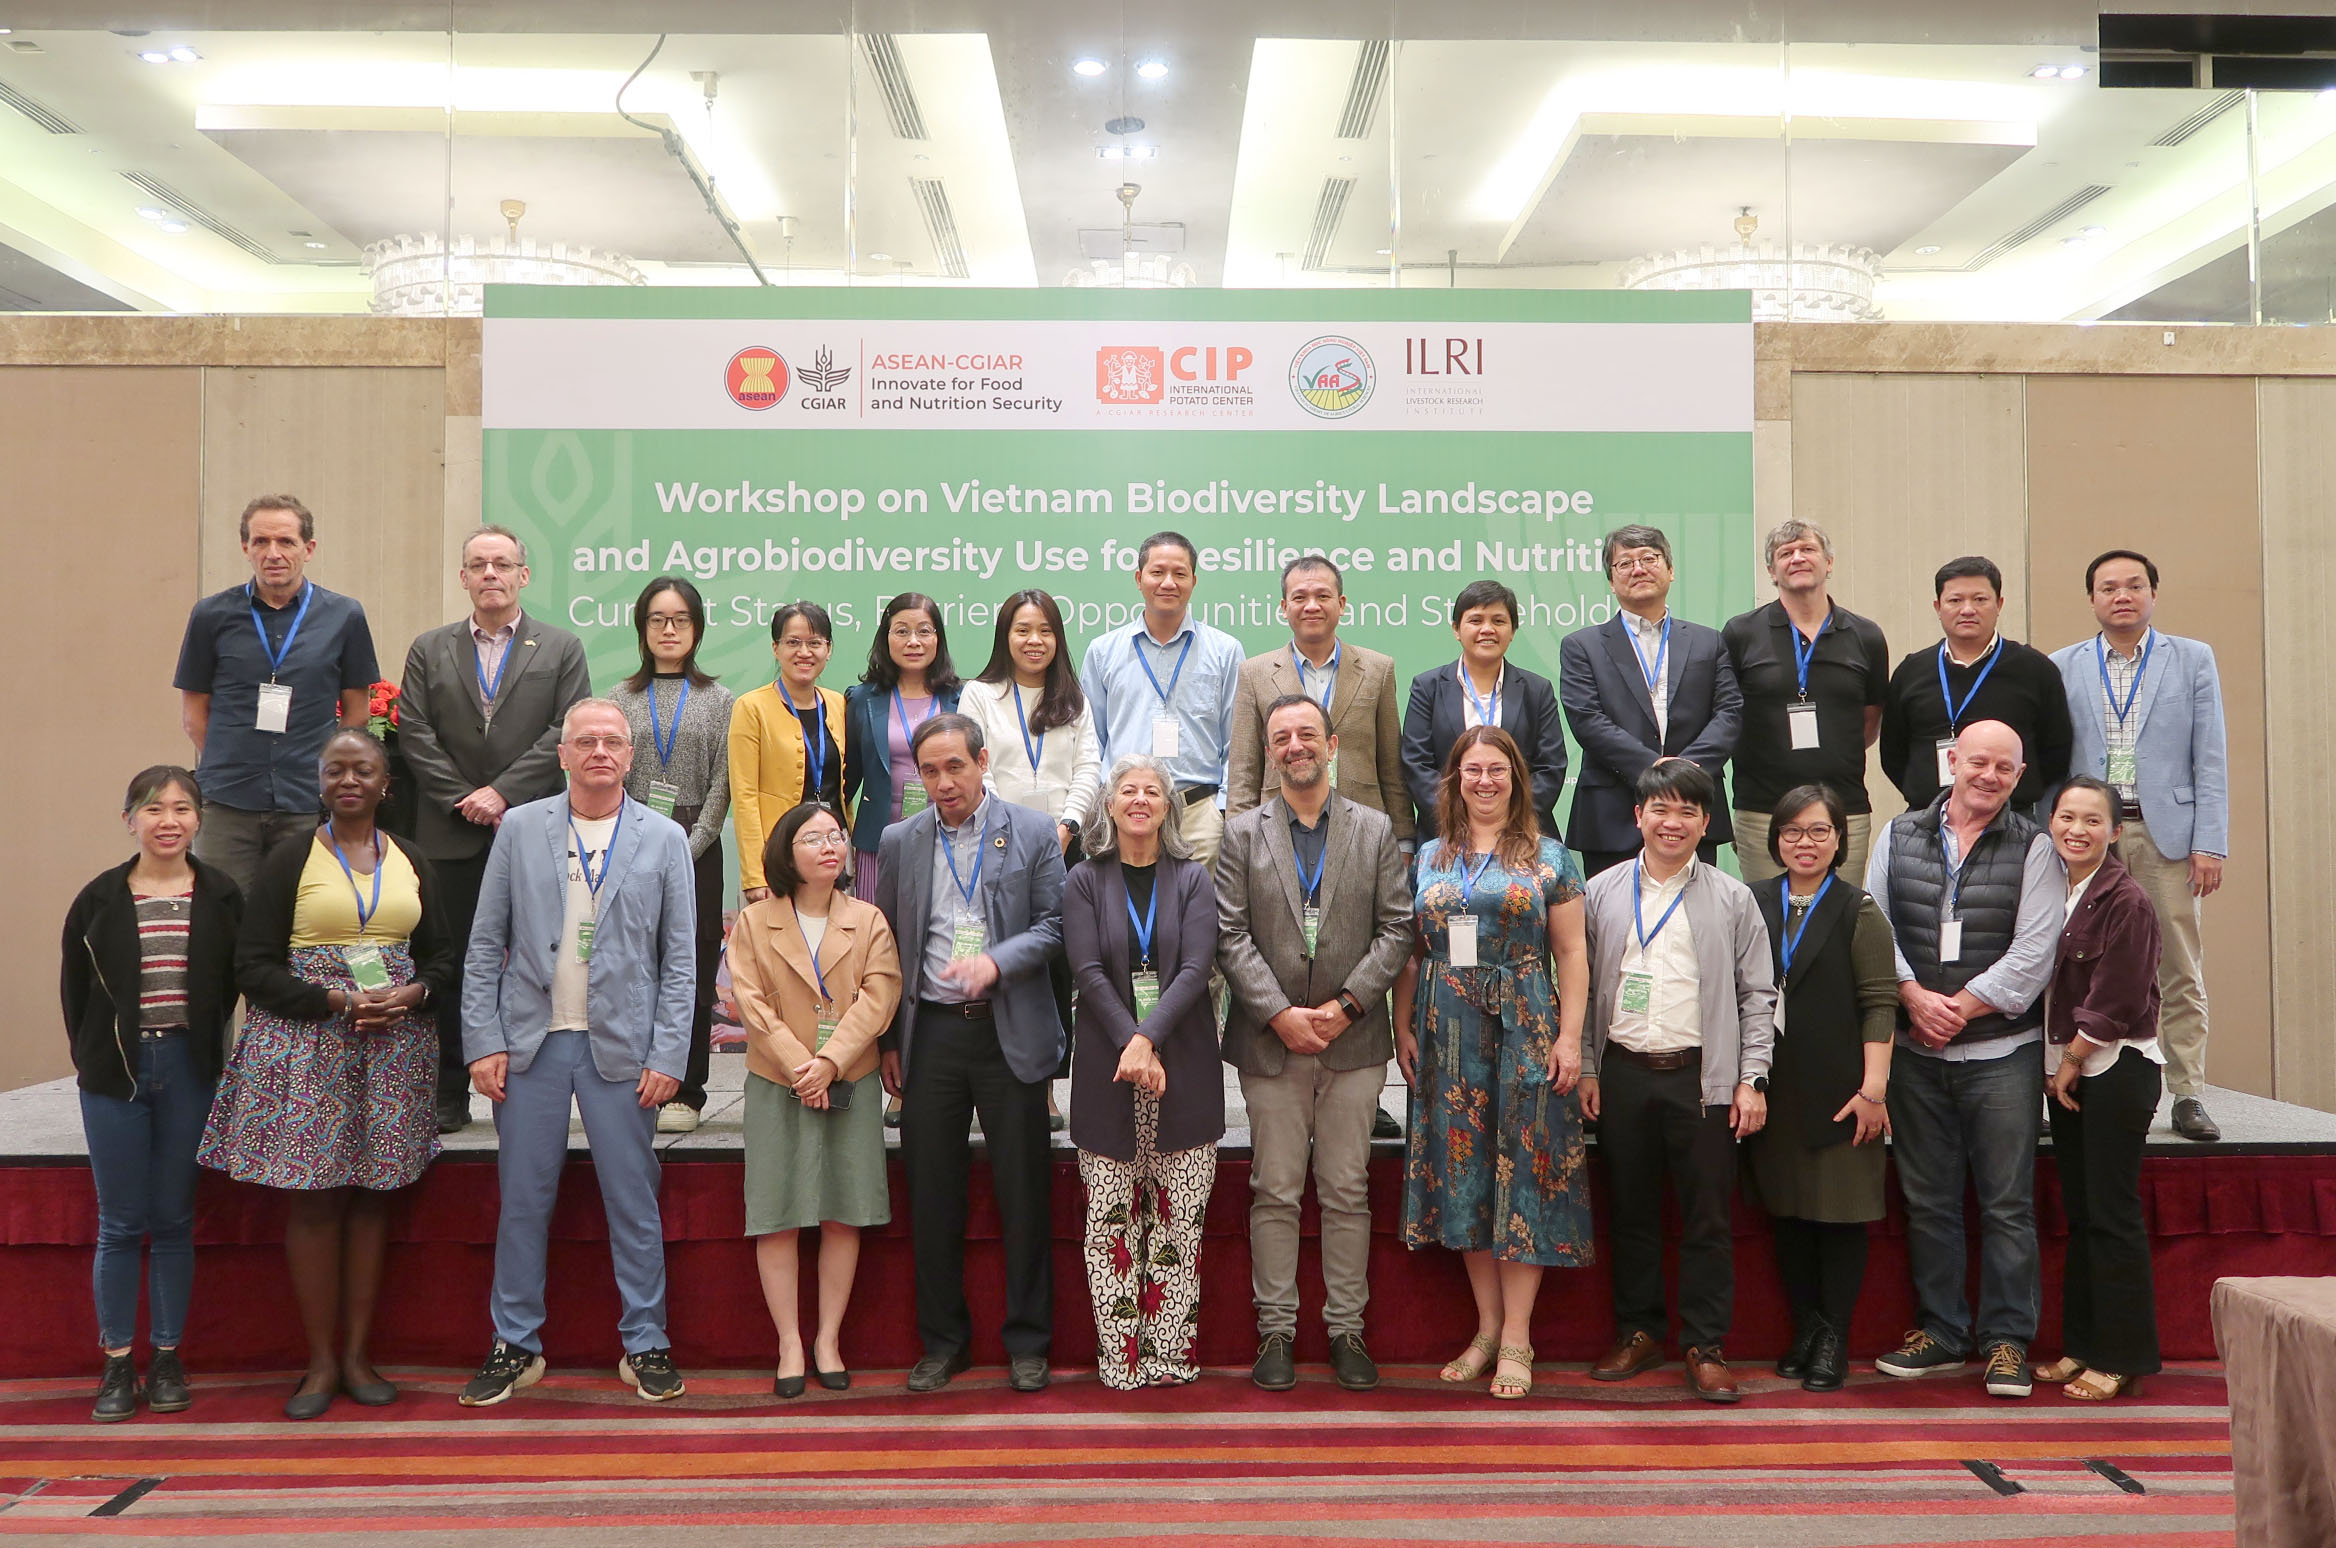 ASEAN-CGIAR workshop reviews use of Vietnam's biodiversity to promote resilience